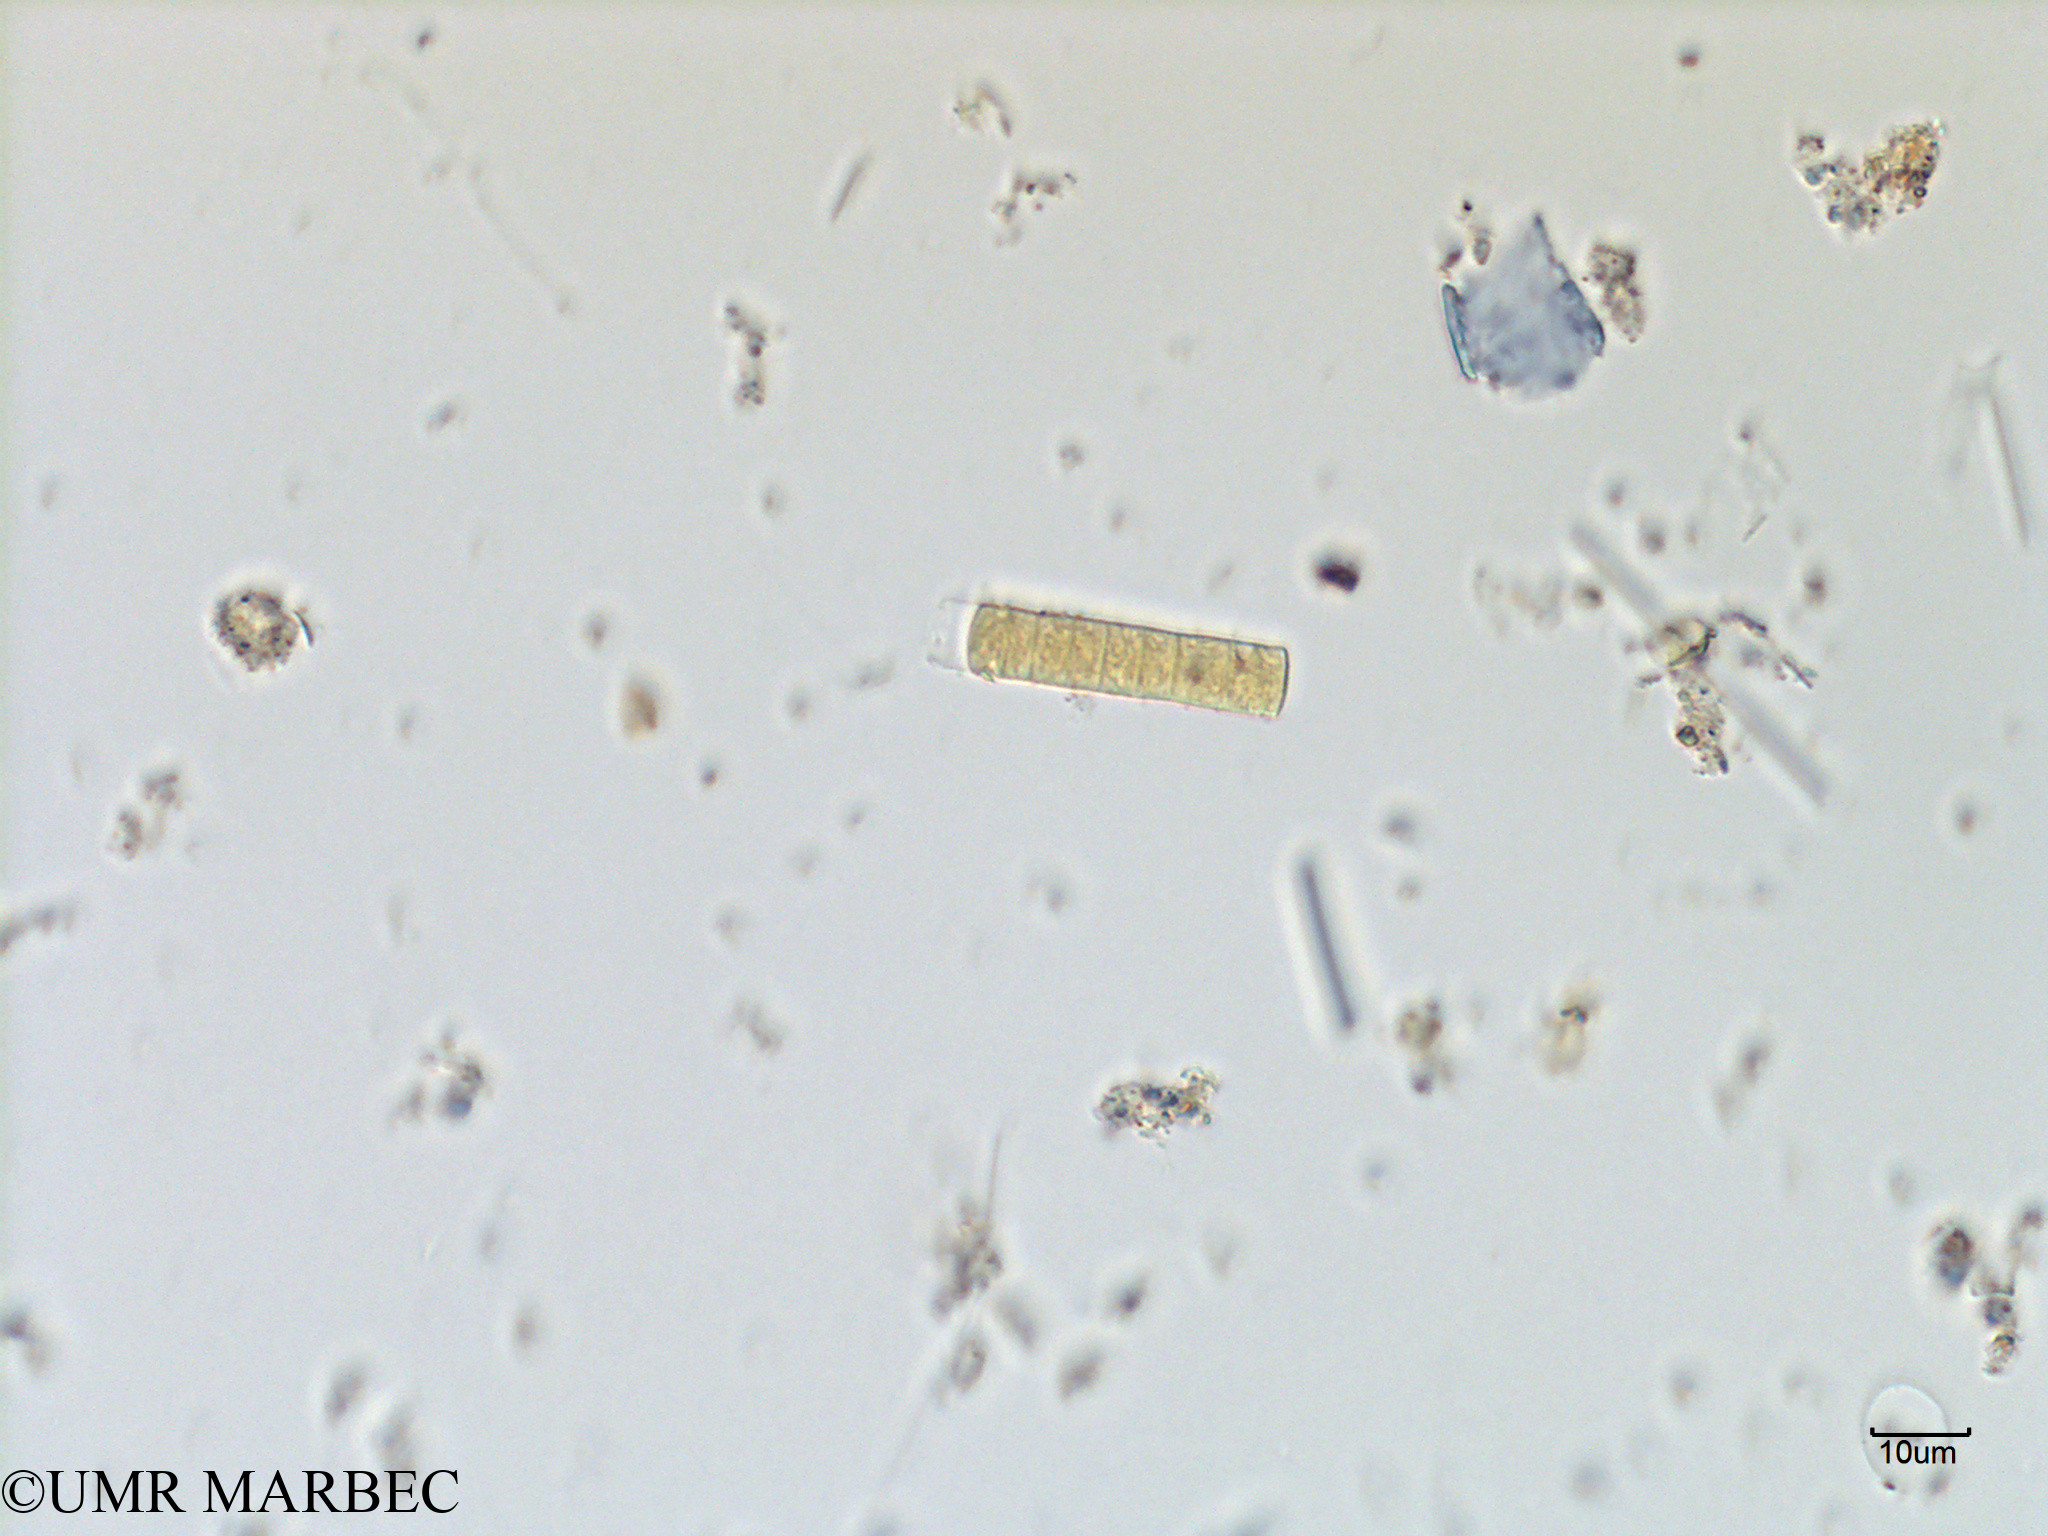 phyto/Scattered_Islands/mayotte_lagoon/SIREME May 2016/Trichodesmium sp4 (MAY4_trichodesmium avec gaine).tif(copy).jpg